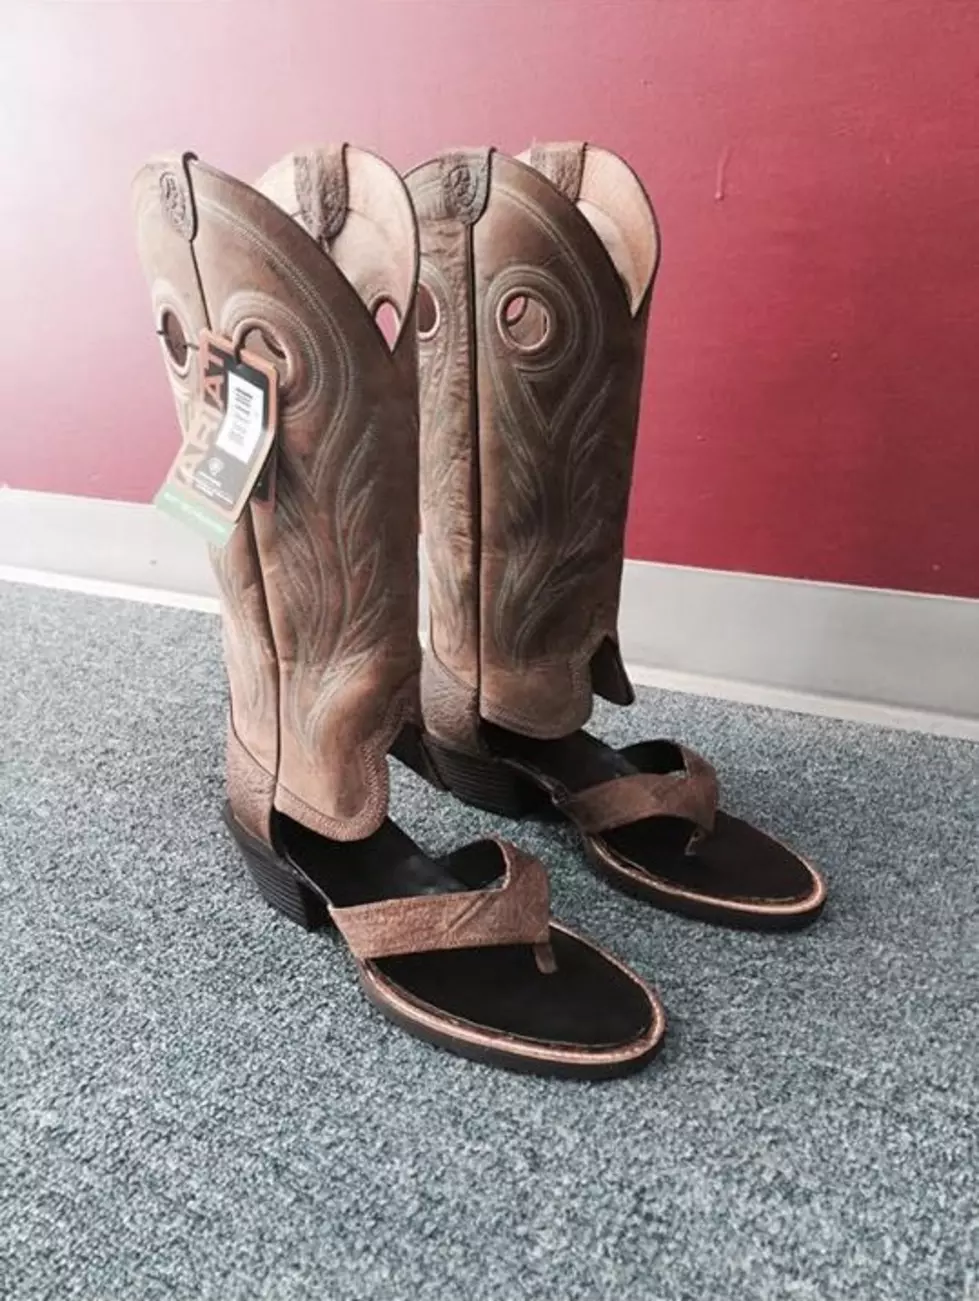 What Texan Would Wear These